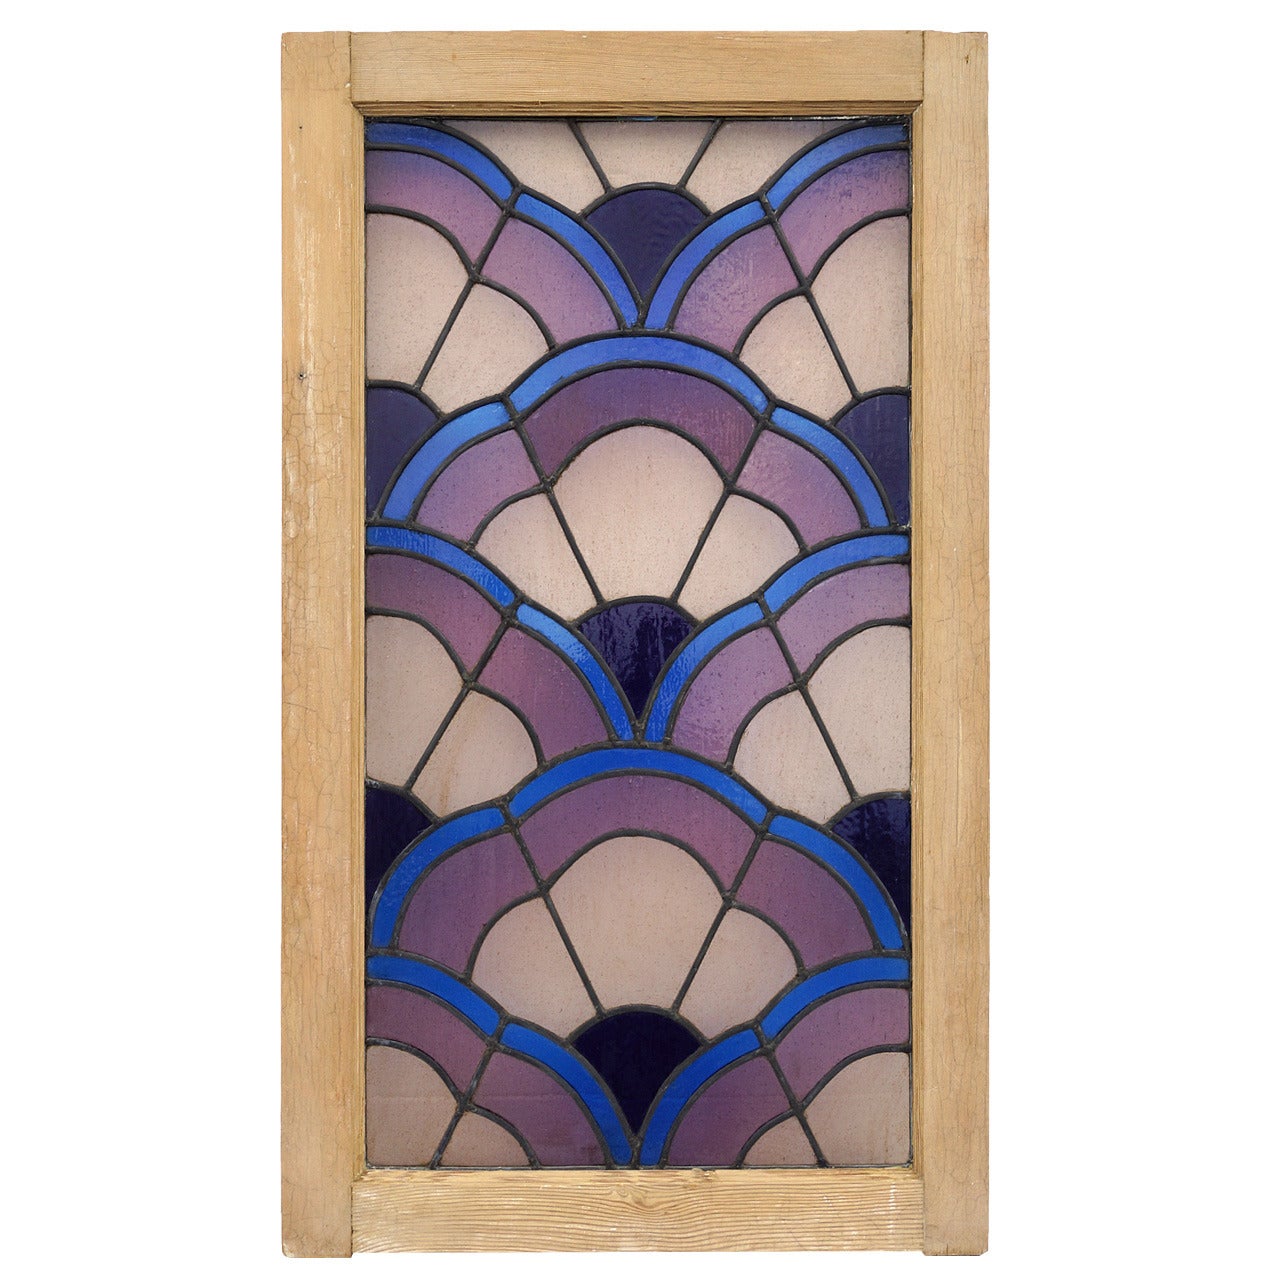 Italian Art Deco Stained Glass Window For Sale